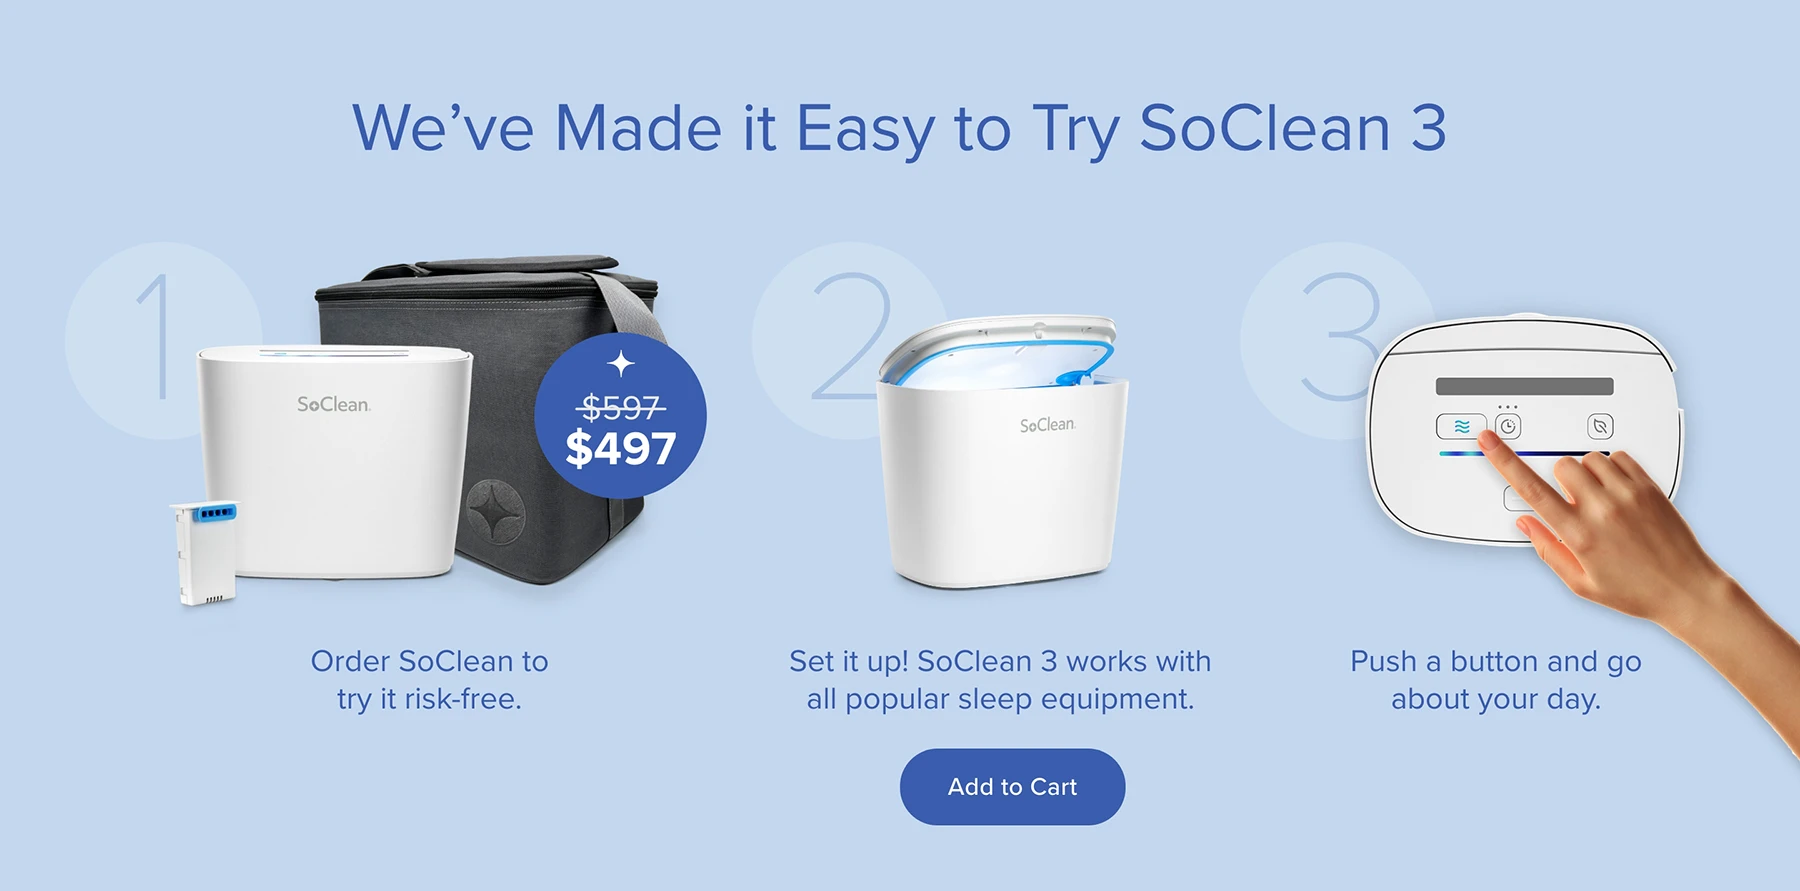 We've Made it Easy to try SoClean 3